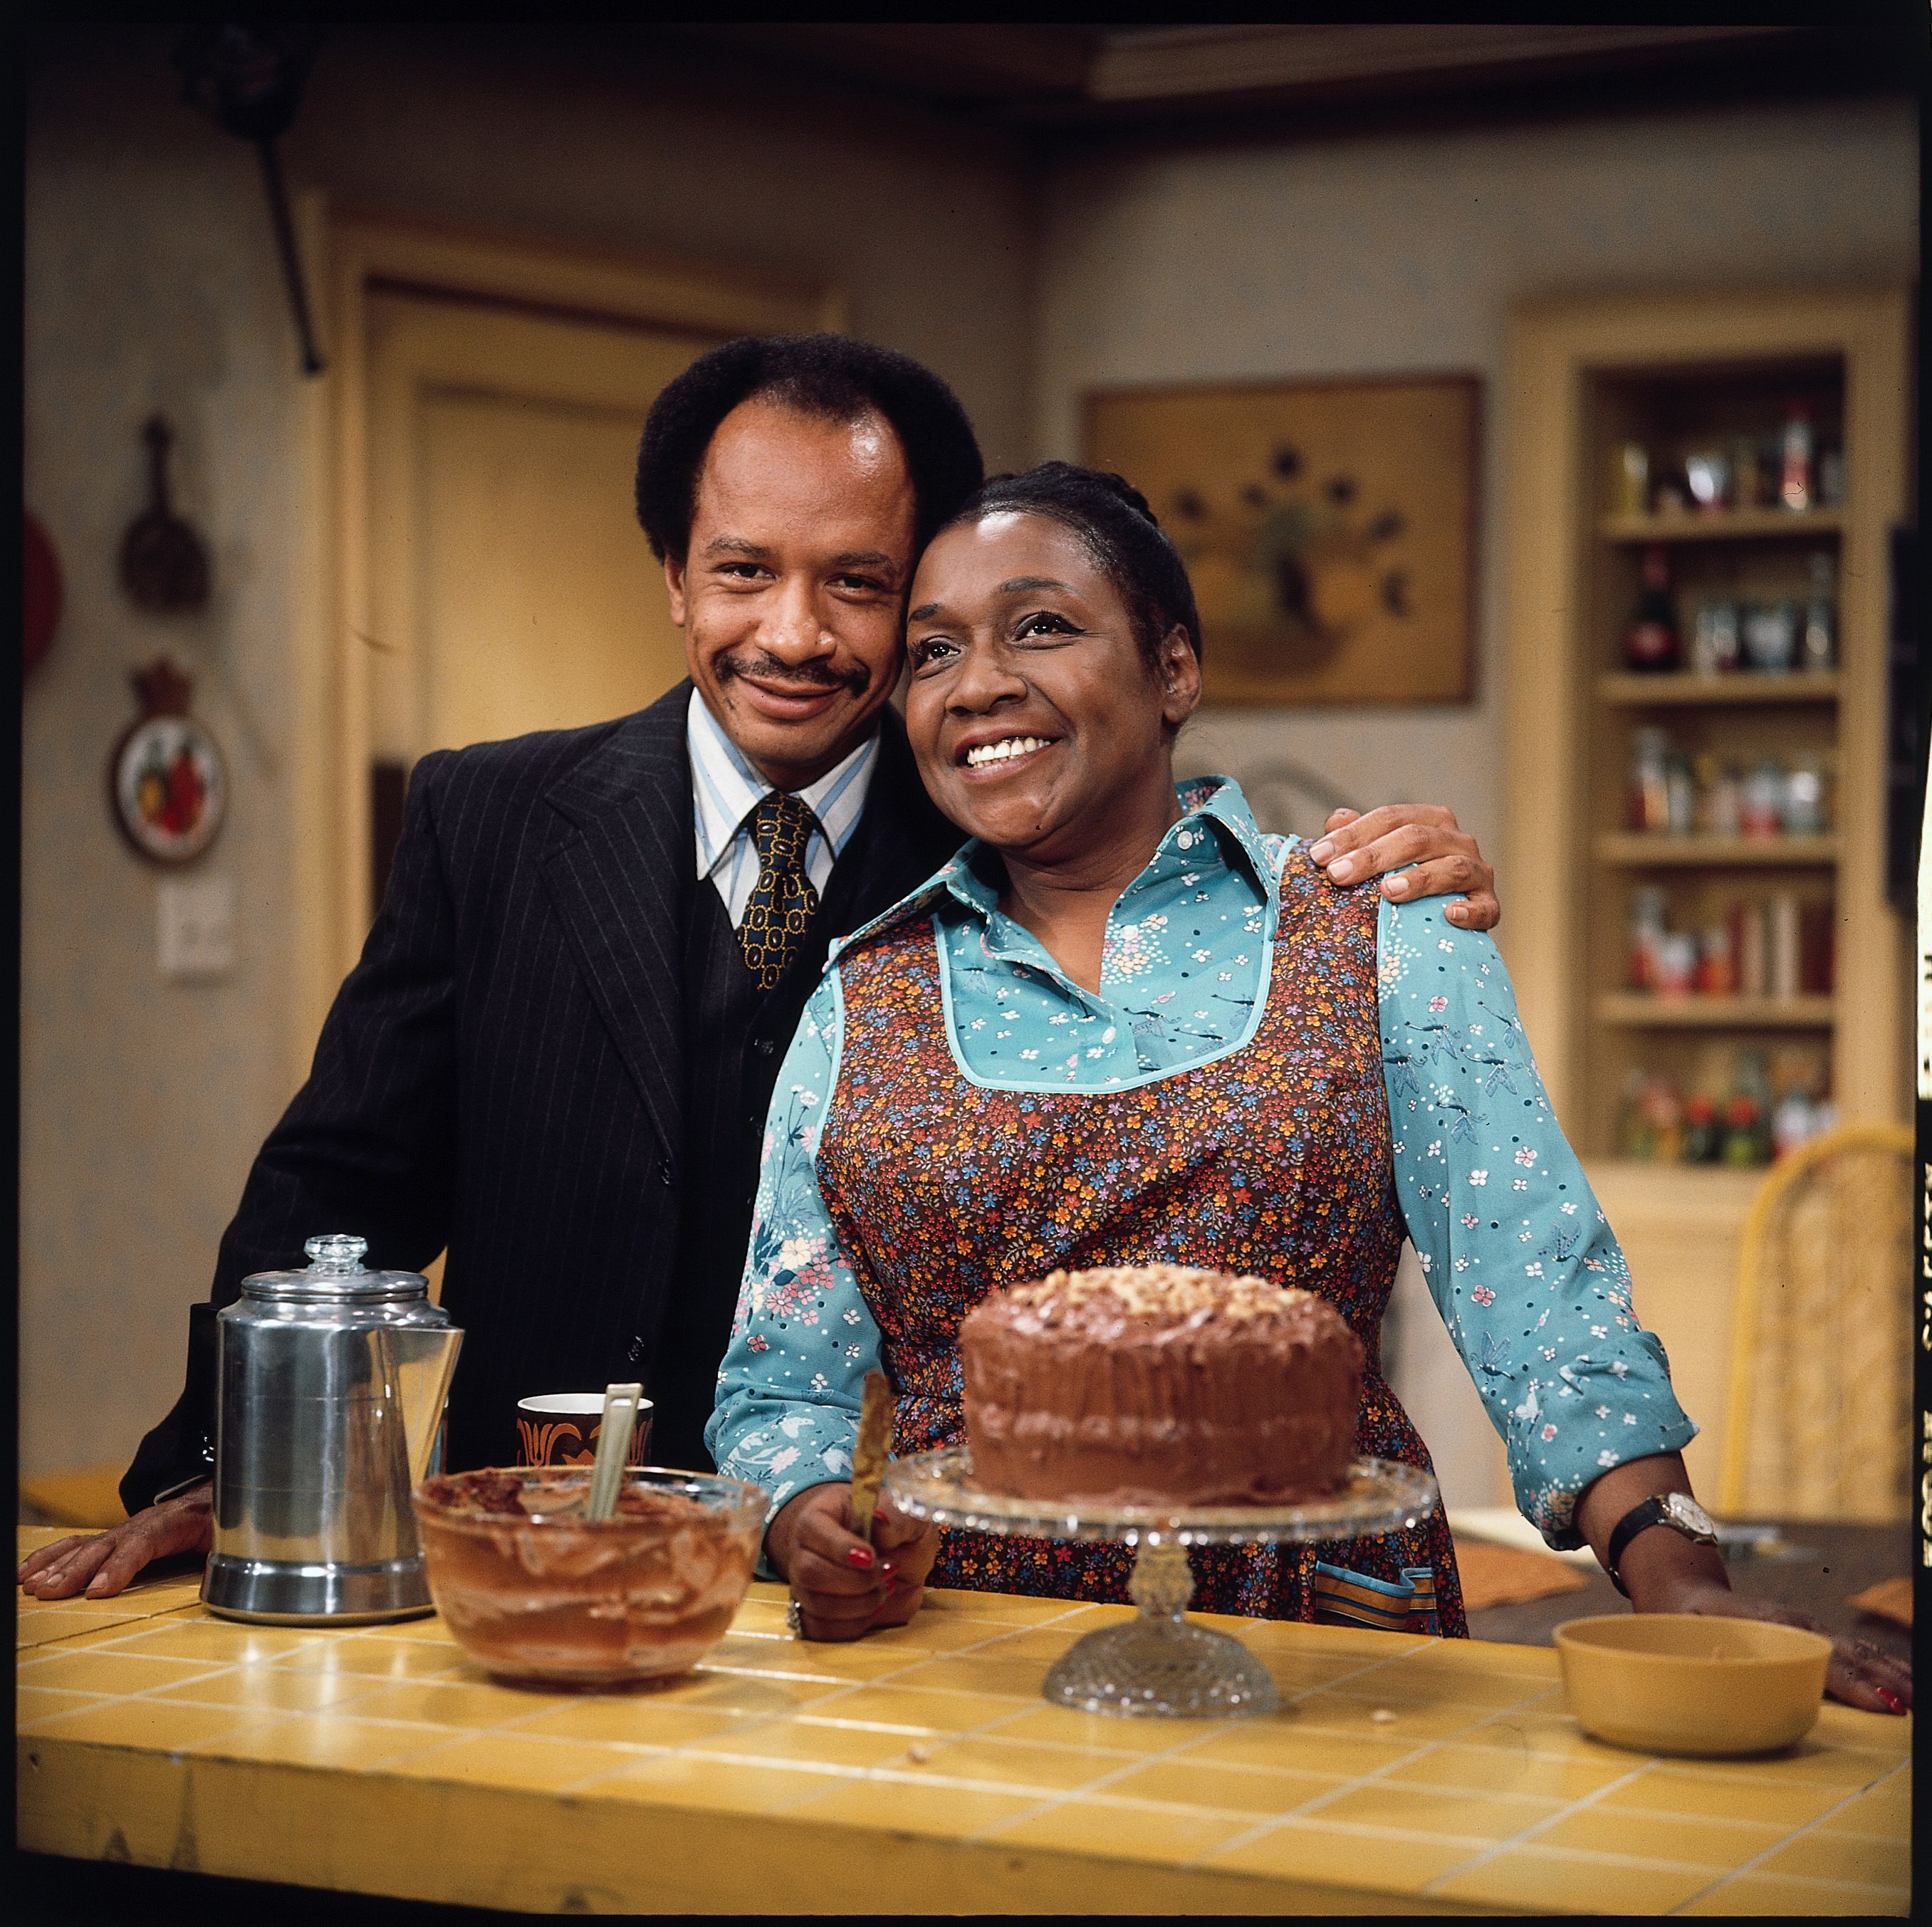 sabel Sanford as Louise Jefferson with her on-air husband, Sherman Hemsley as George Jefferson in "The Jeffersons" | Photo: CBS via Getty Images